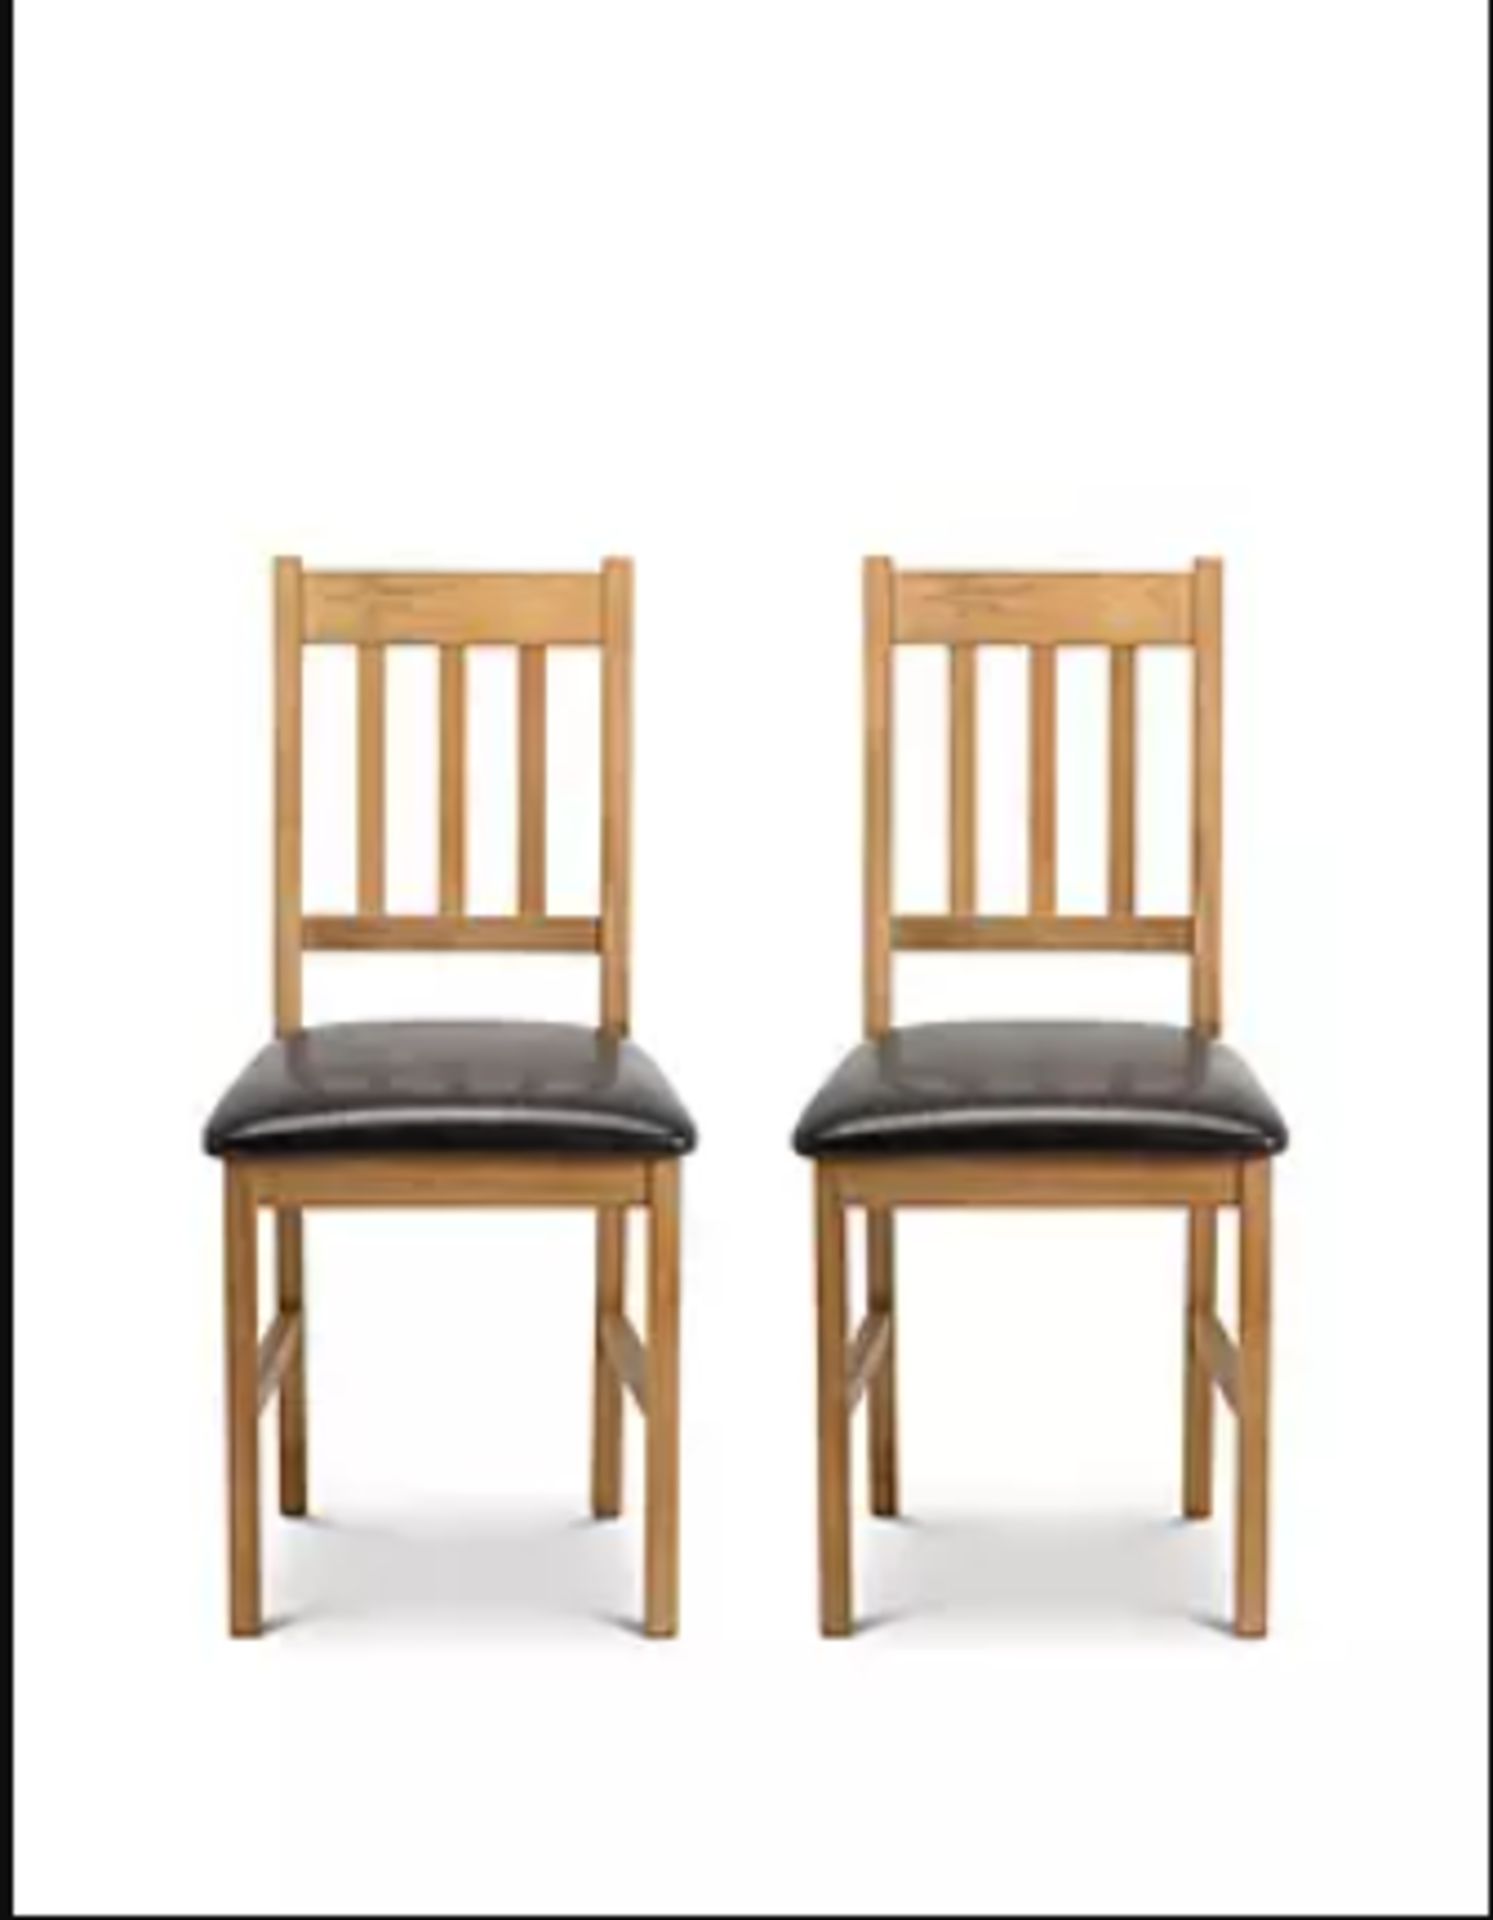 COXMOOR SET OF 2 DINING CHAIRS RRP £169